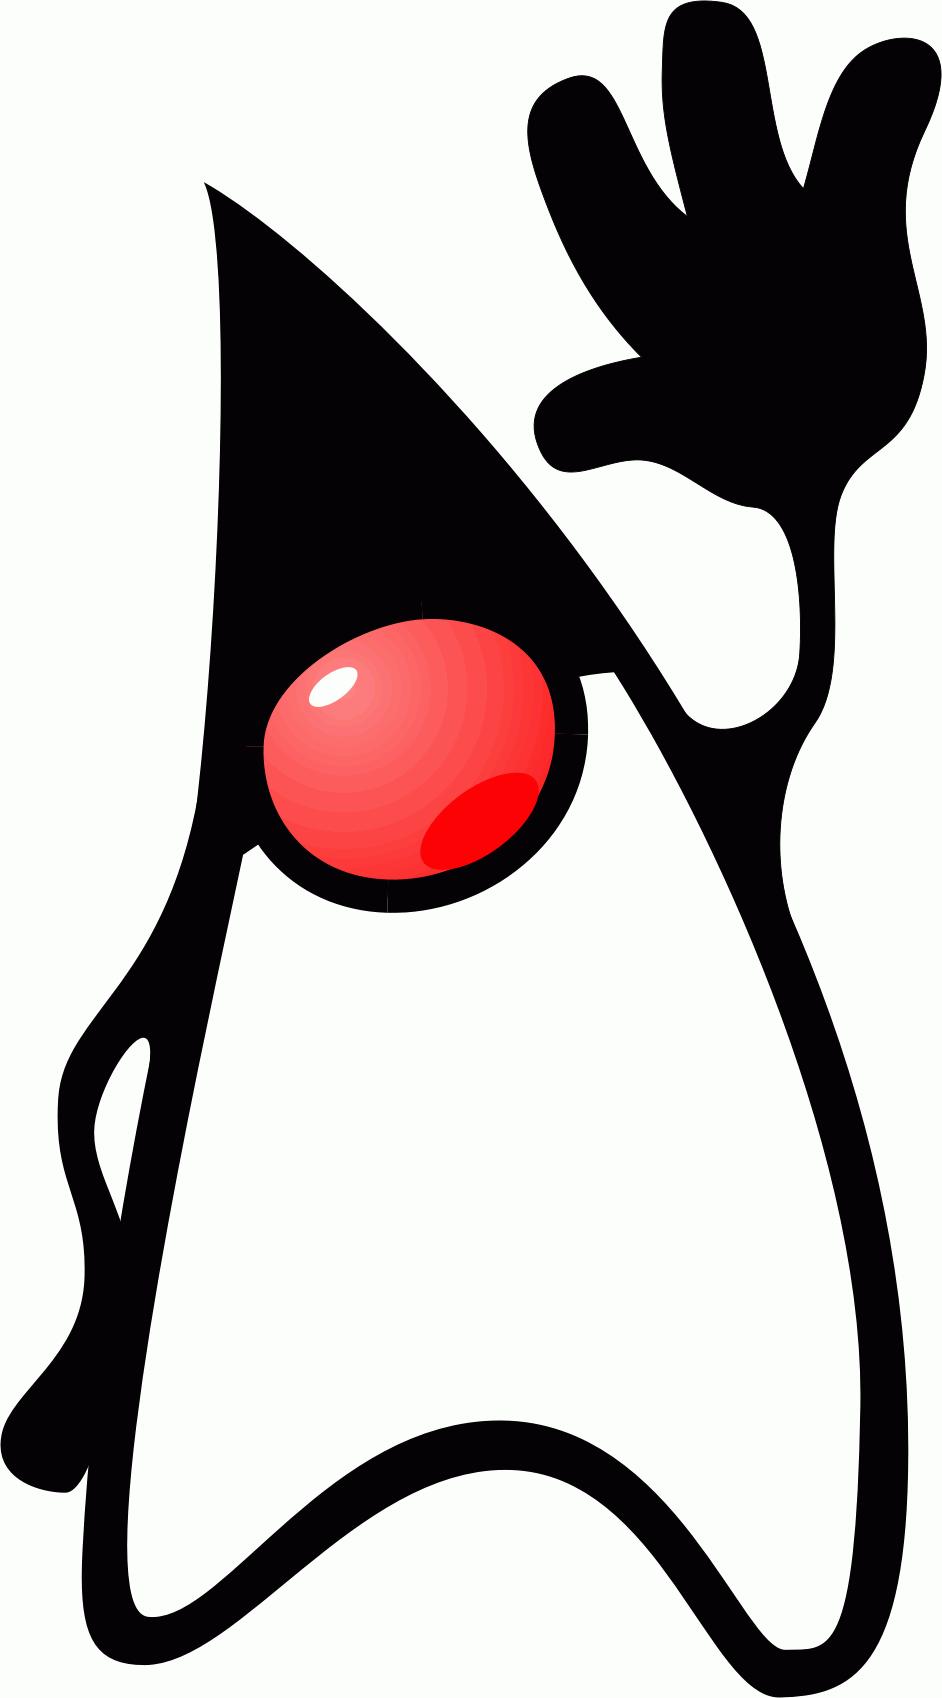 Java From Wikipedia: 1 "... Java is a general-purpose, concurrent, class-based, object-oriented language.